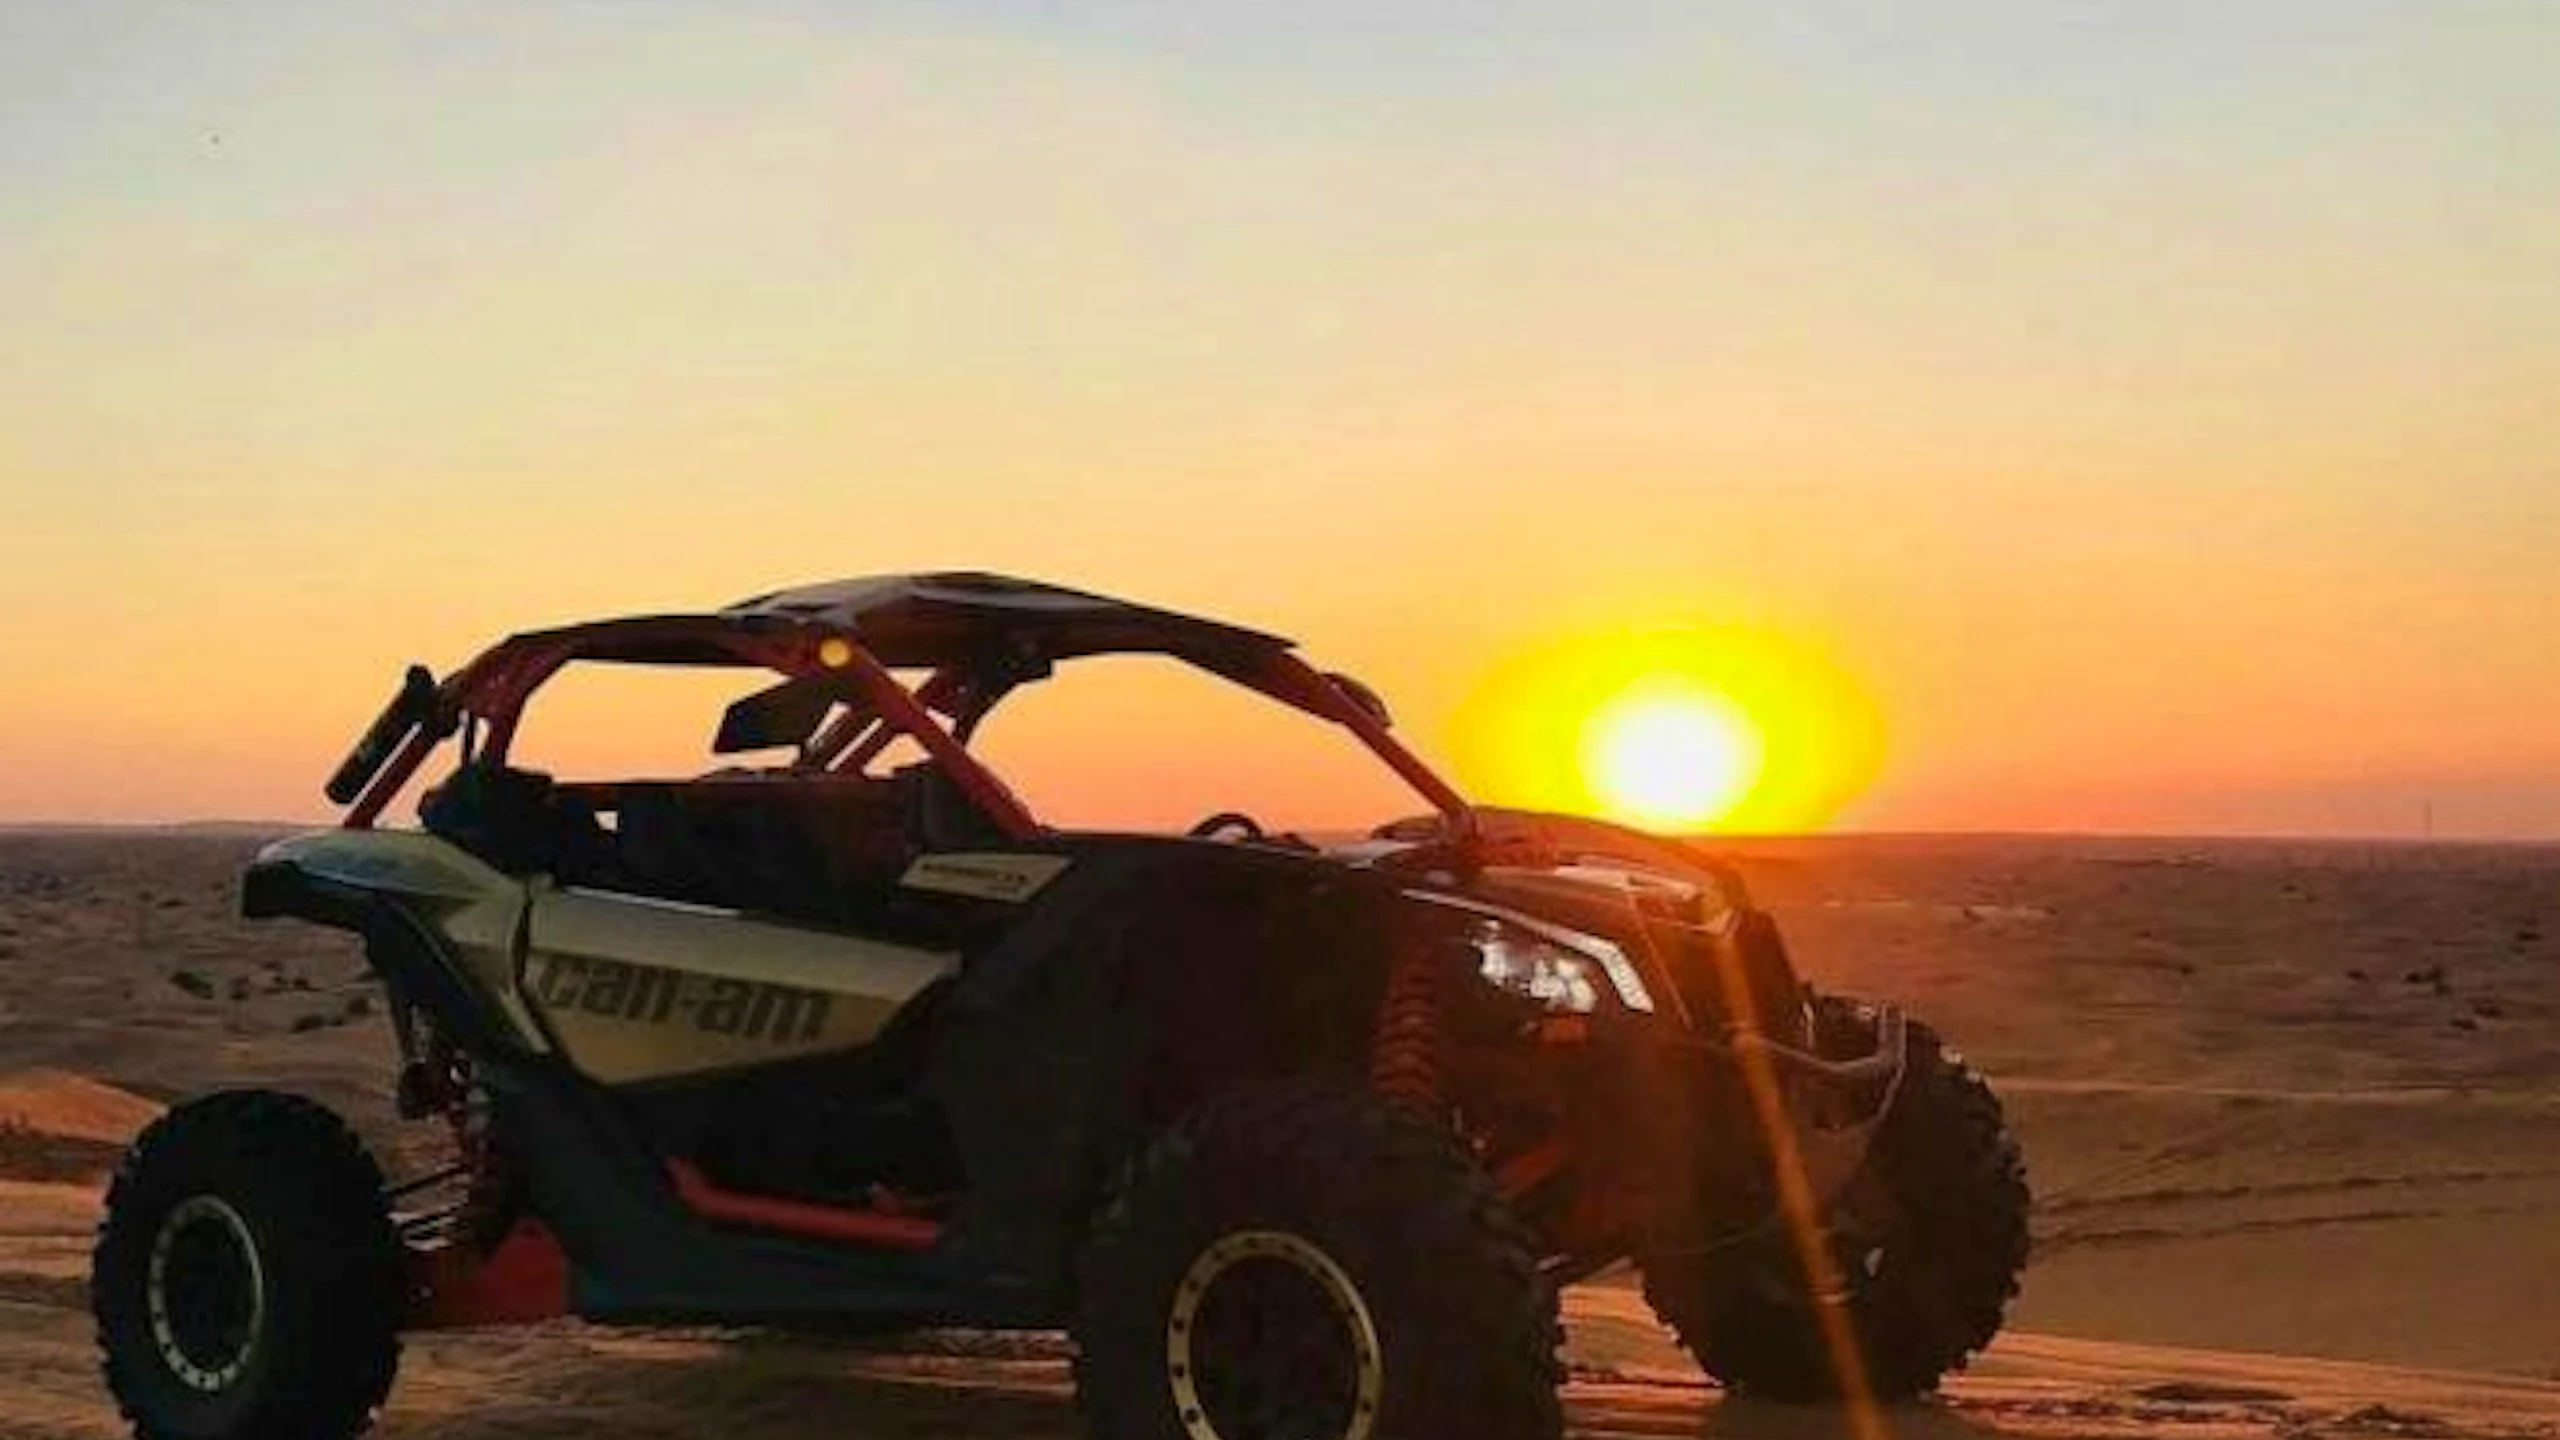 Can-Am 1000 CC Open Desert Experience: Self Drive - Four Seater Location